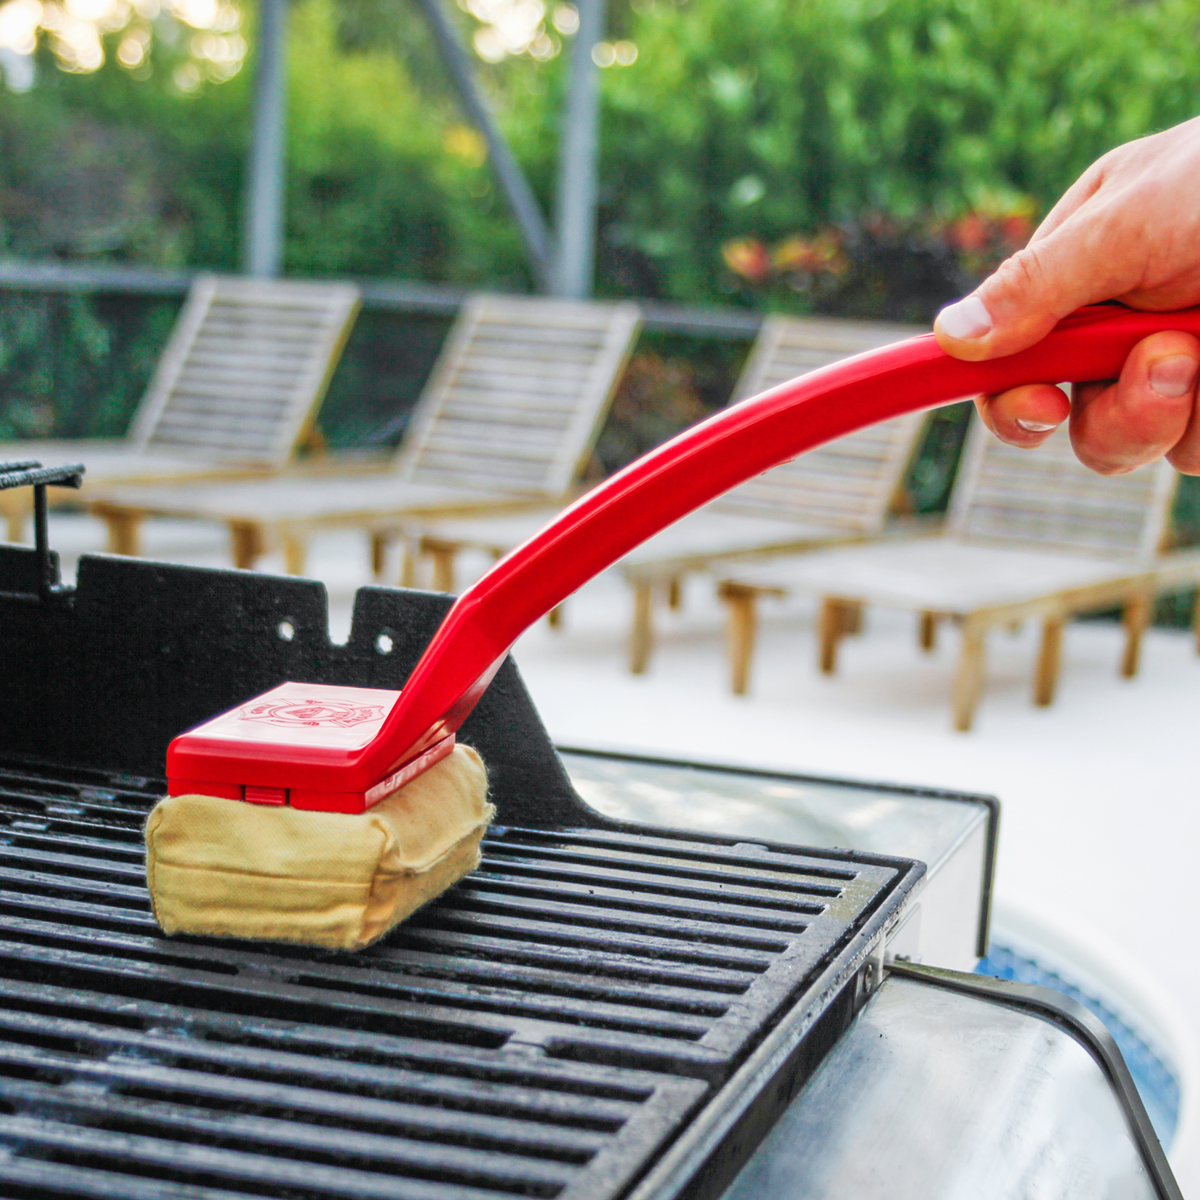 HowToBBQRight Old Fashioned Grill Cleaner